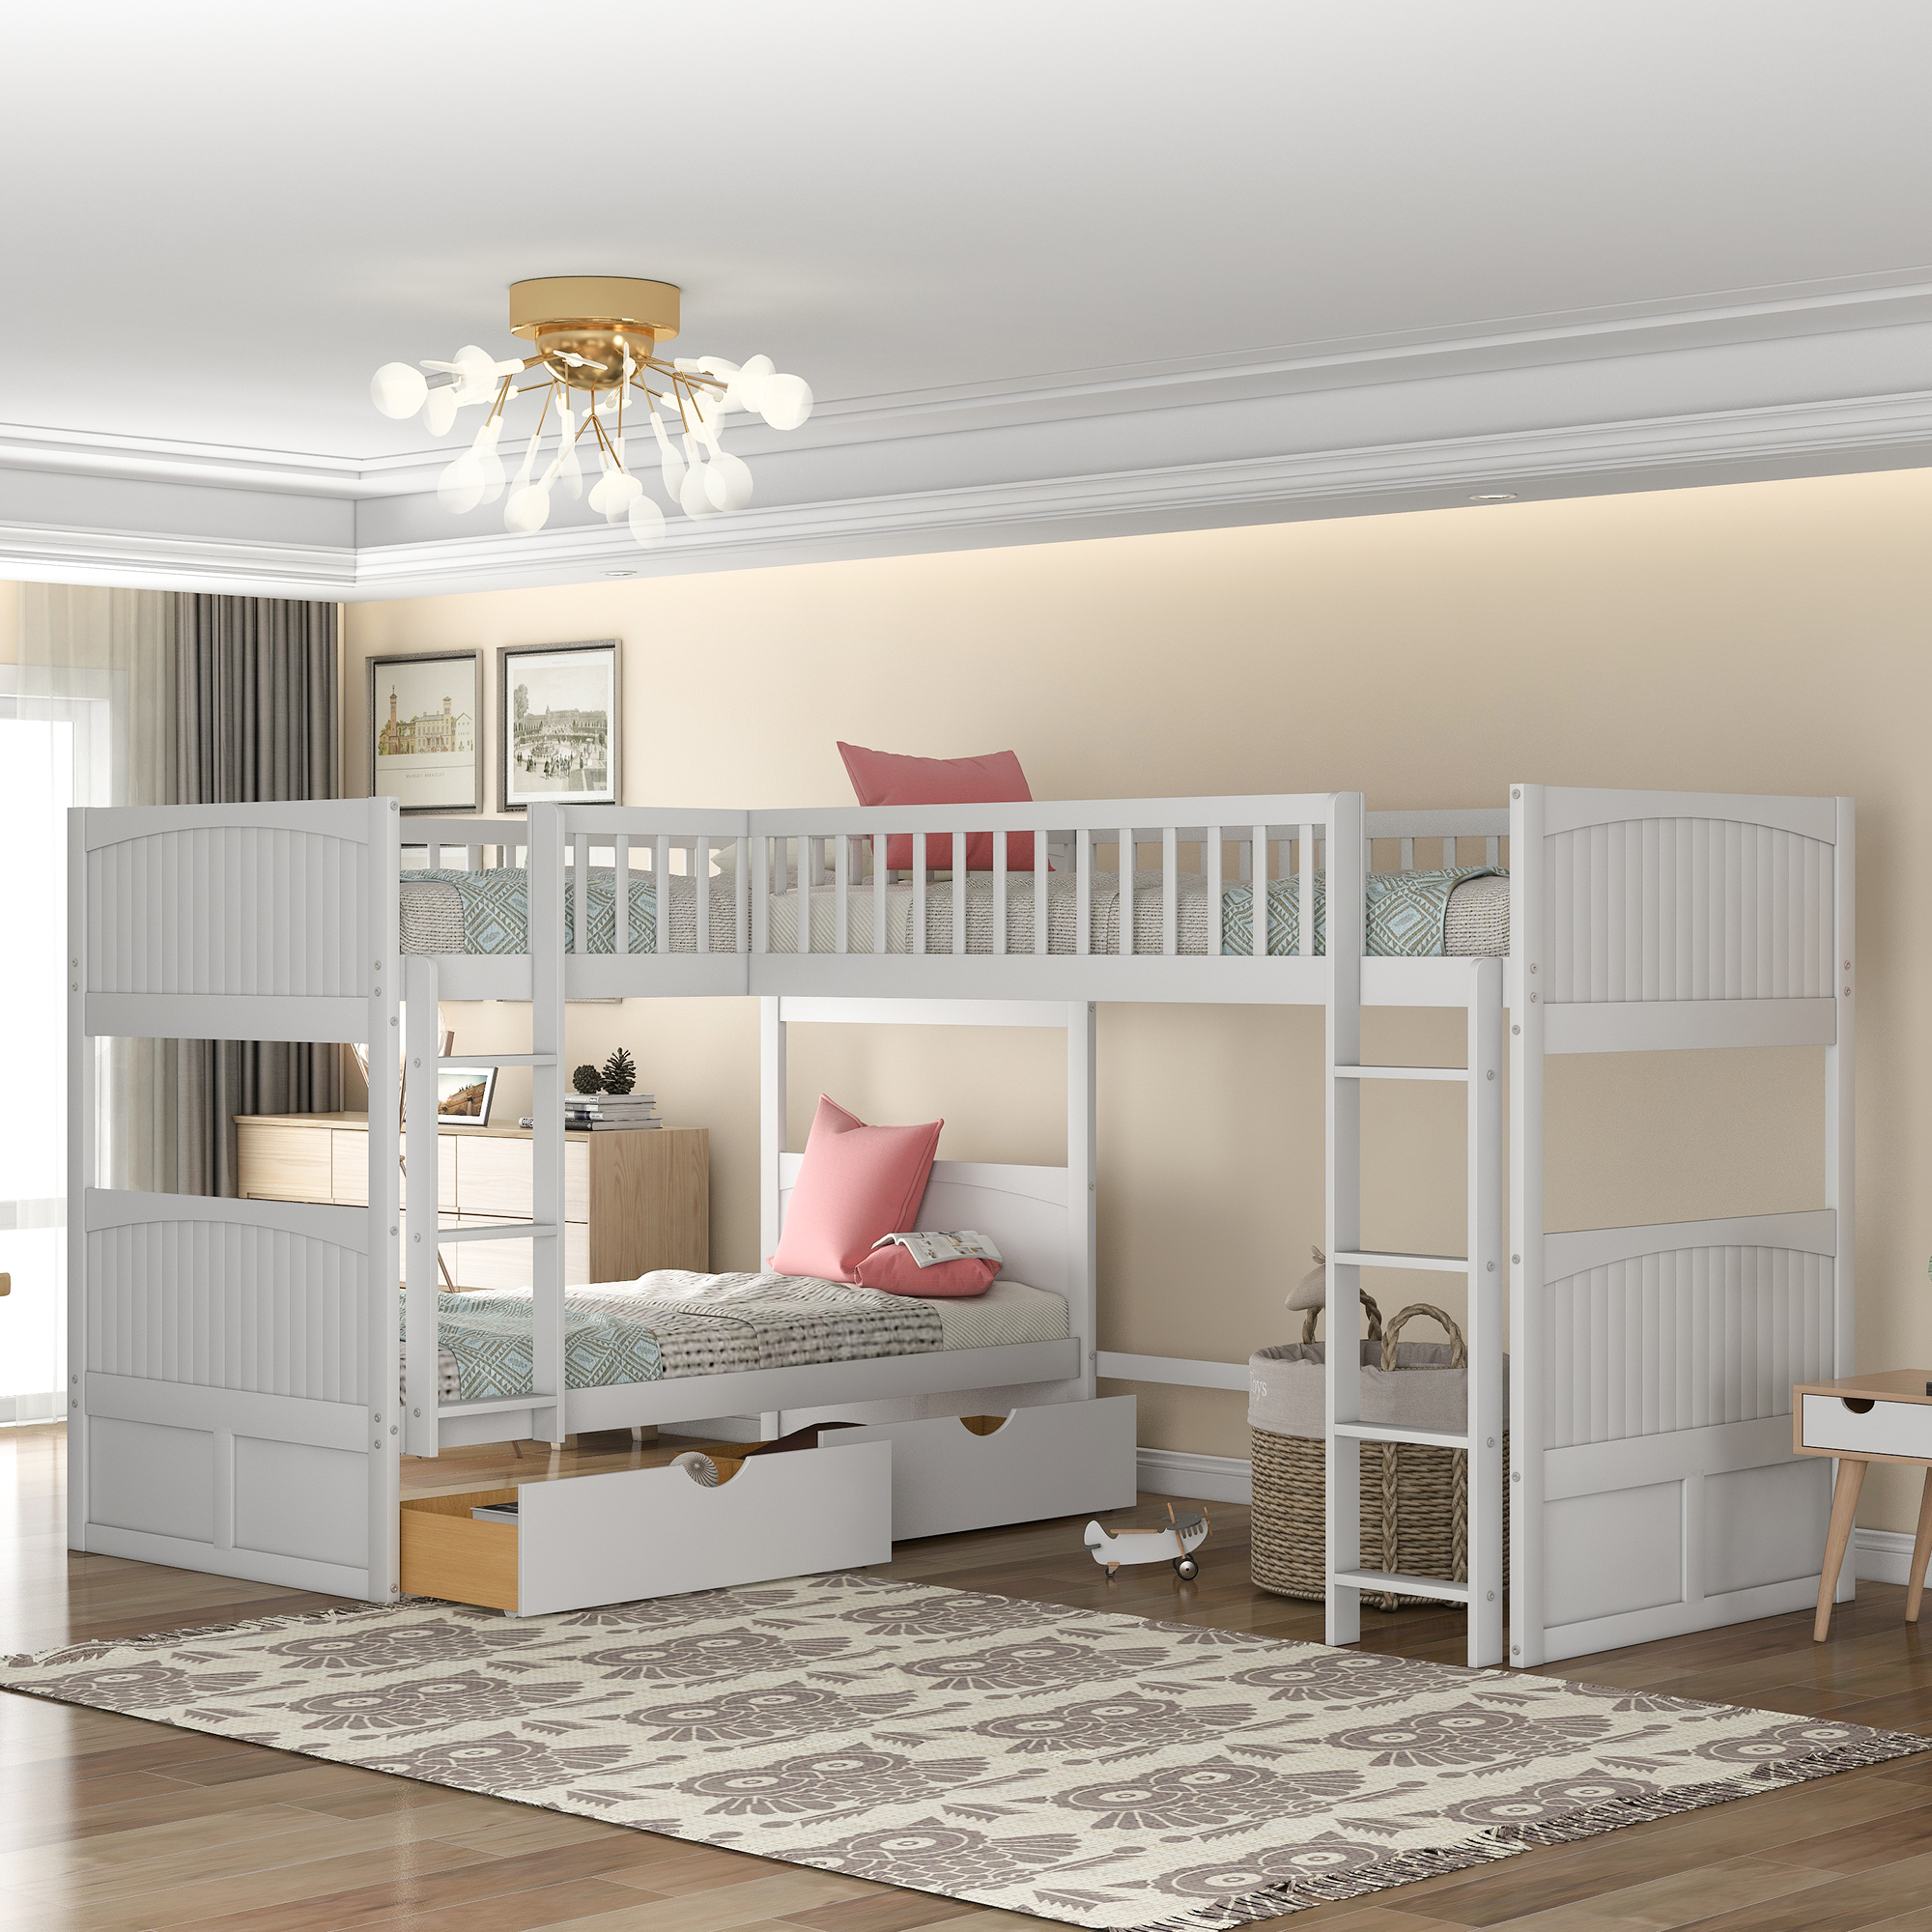 Euroco Wood Bunk Bed Storage, Twin-over-Twin-over-Twin for Children's Bedroom, White - image 1 of 12